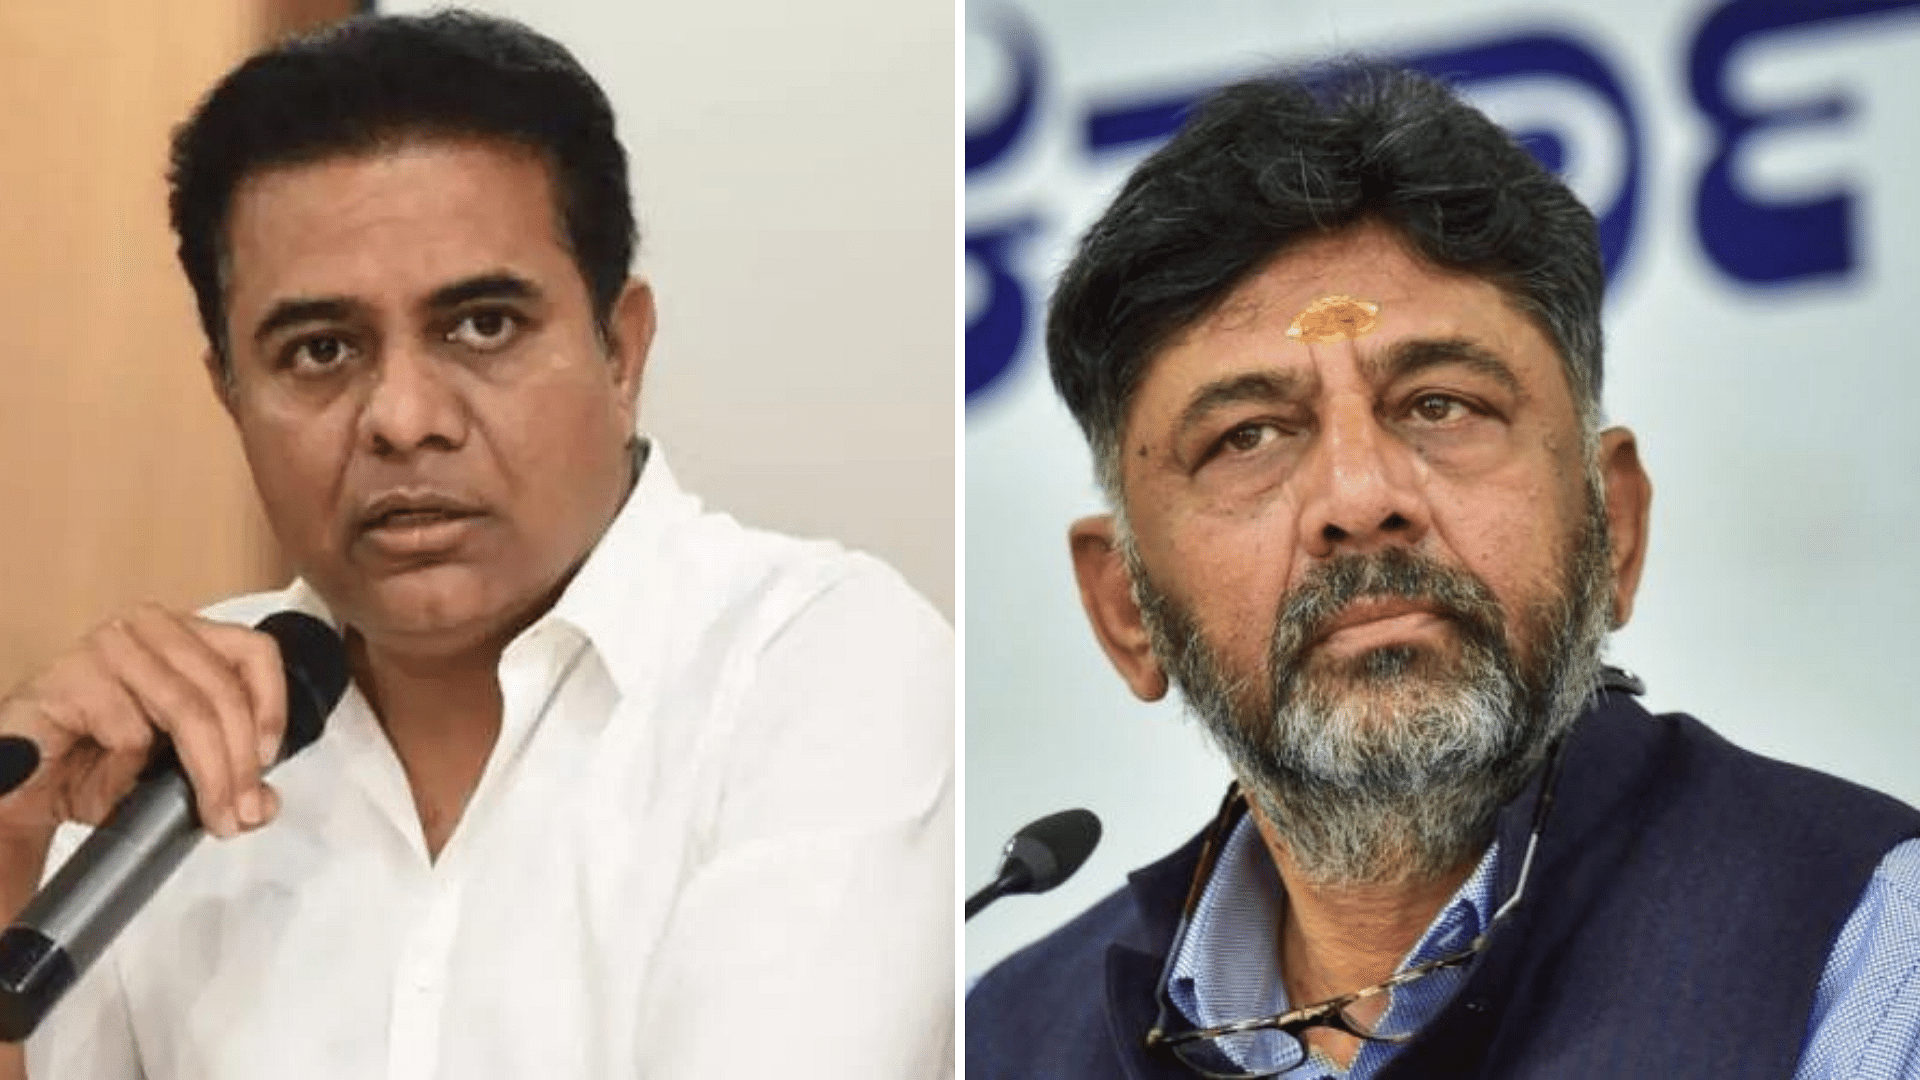 <div class="paragraphs"><p>In a Twitter tete-a-tete between Telangana Minister Kalvakuntla Taraka Rama Rao and Karnataka Congress leader DK Shivakumar, KTR told the latter that there should be a healthy competition between the emerging IT hubs of Hyderabad and Bengaluru.</p></div>